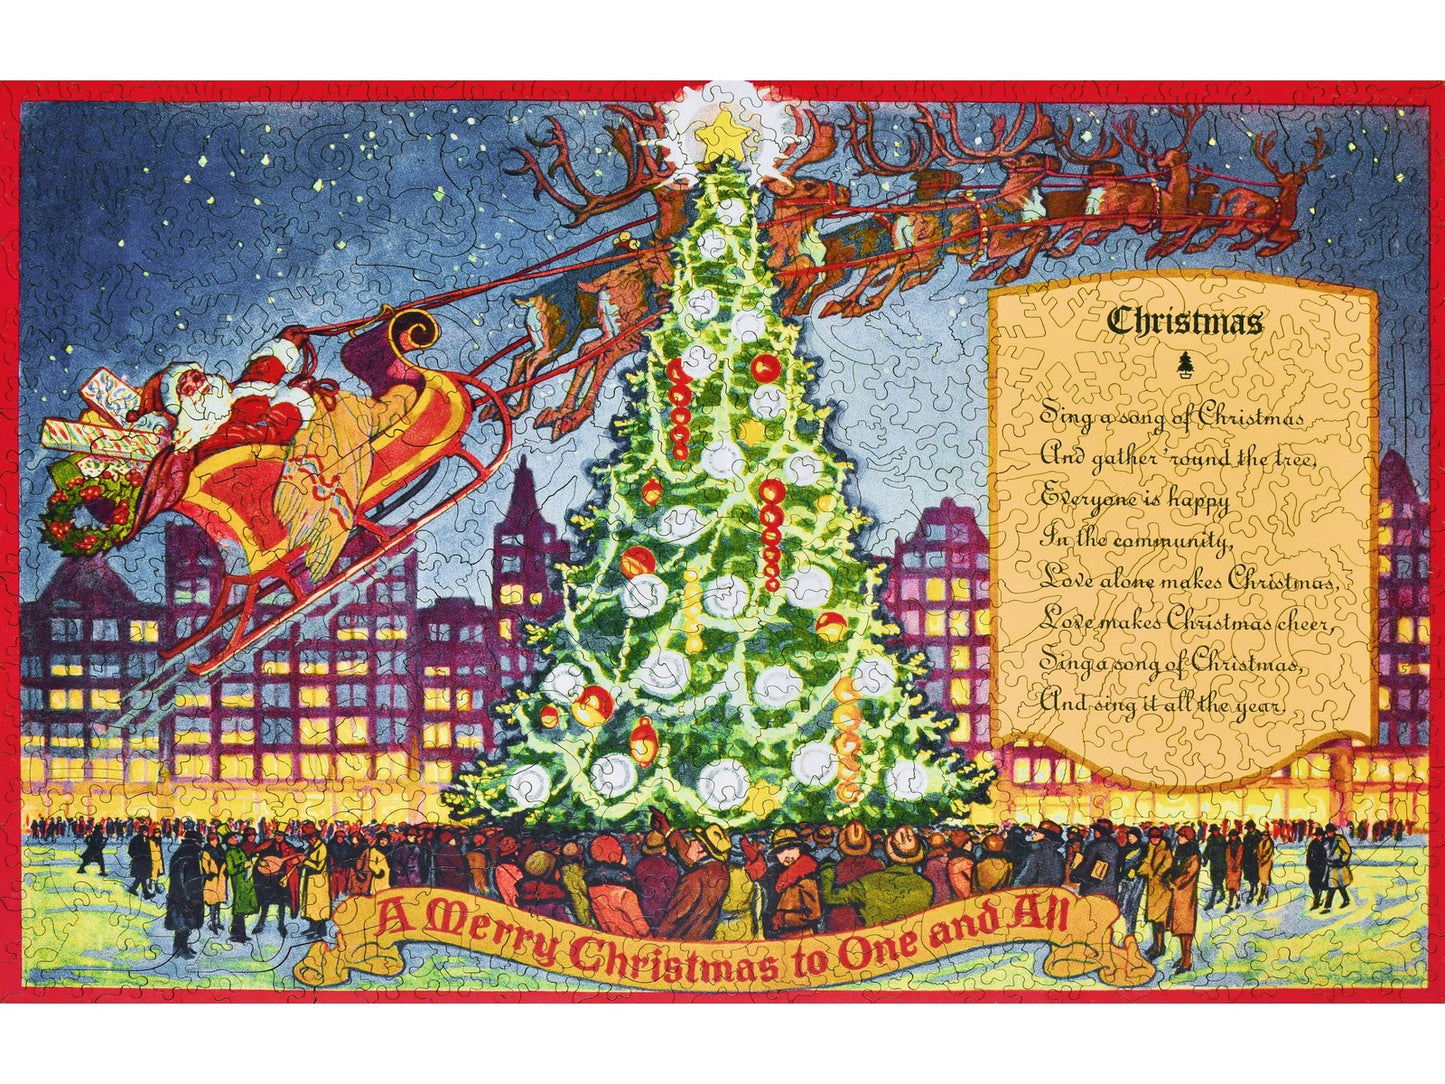 The front of the puzzle, Sing a Song of Christmas, which shows a crowd of people around a christmas tree and santa in his sleigh.